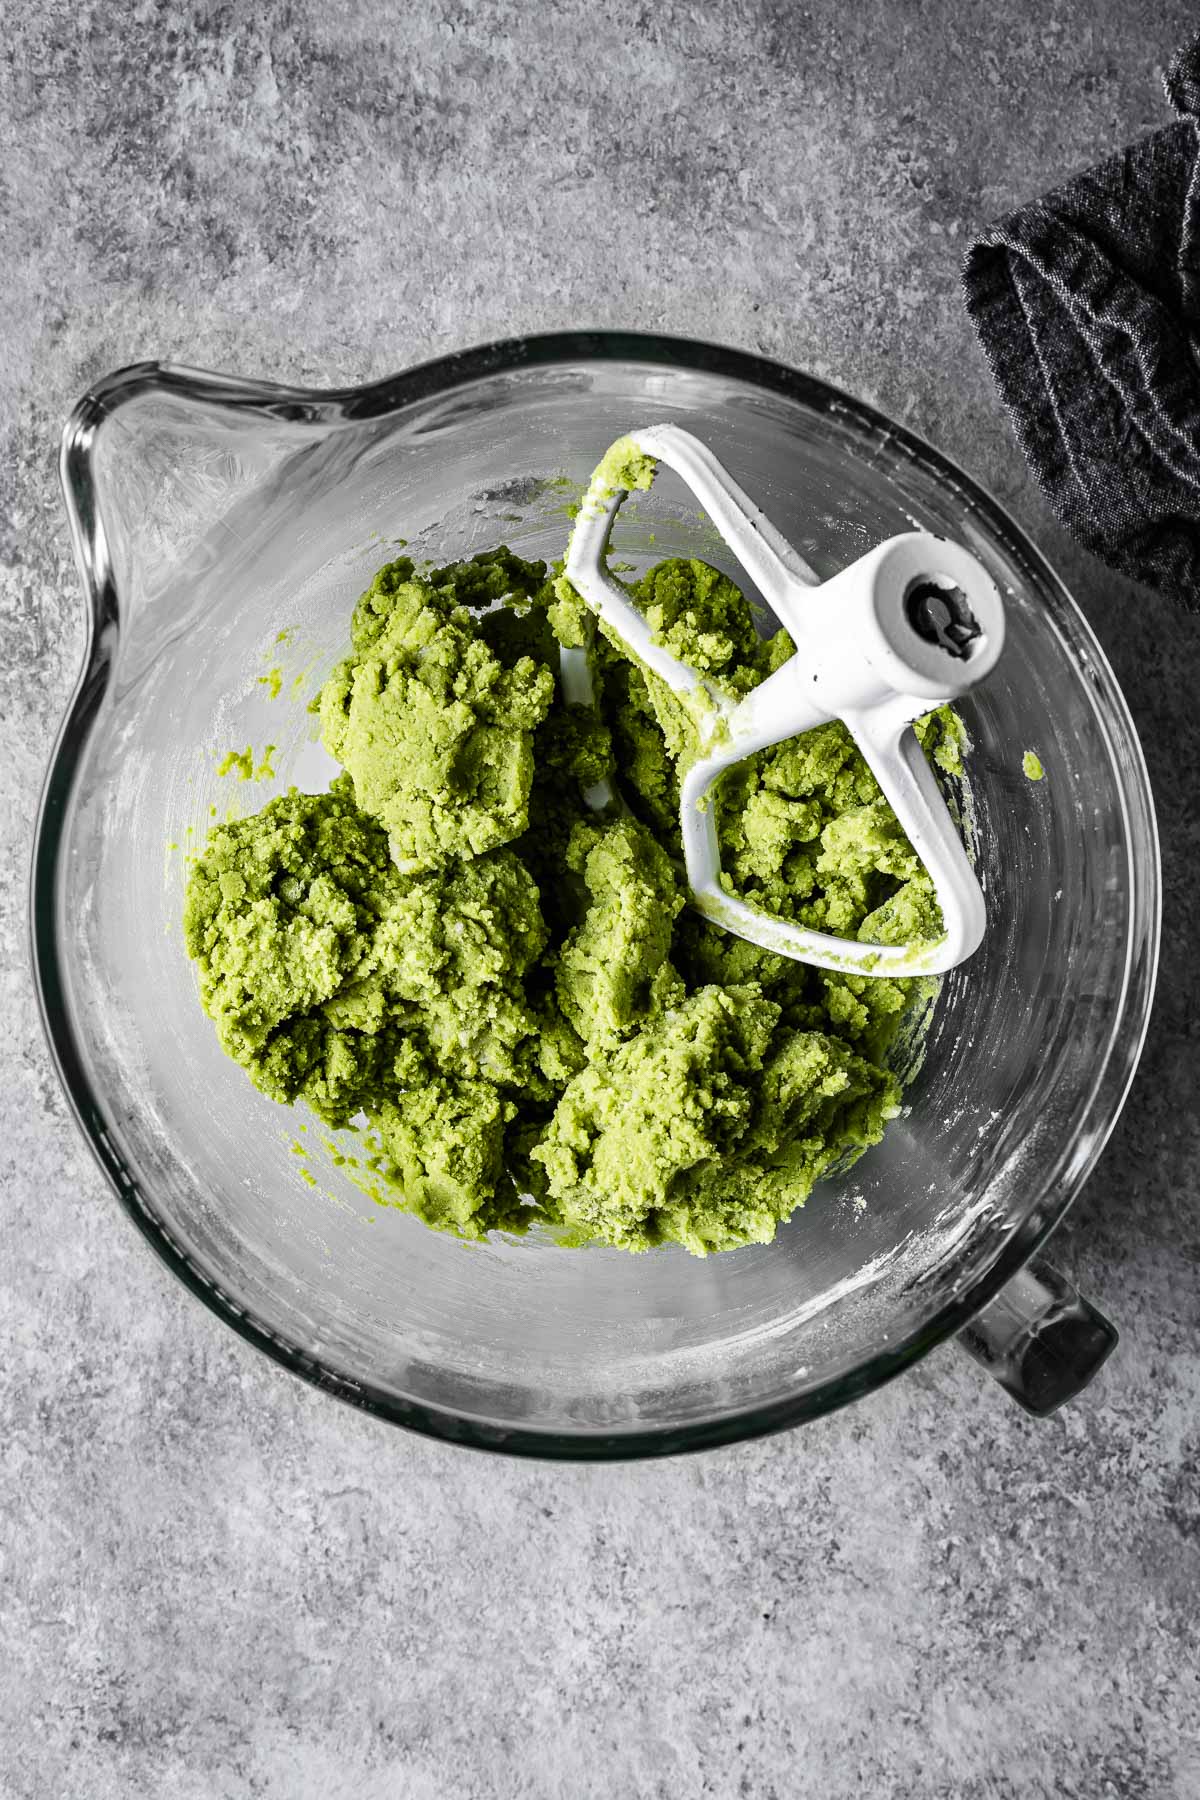 Green matcha cookie dough in a glass mixing bowl.